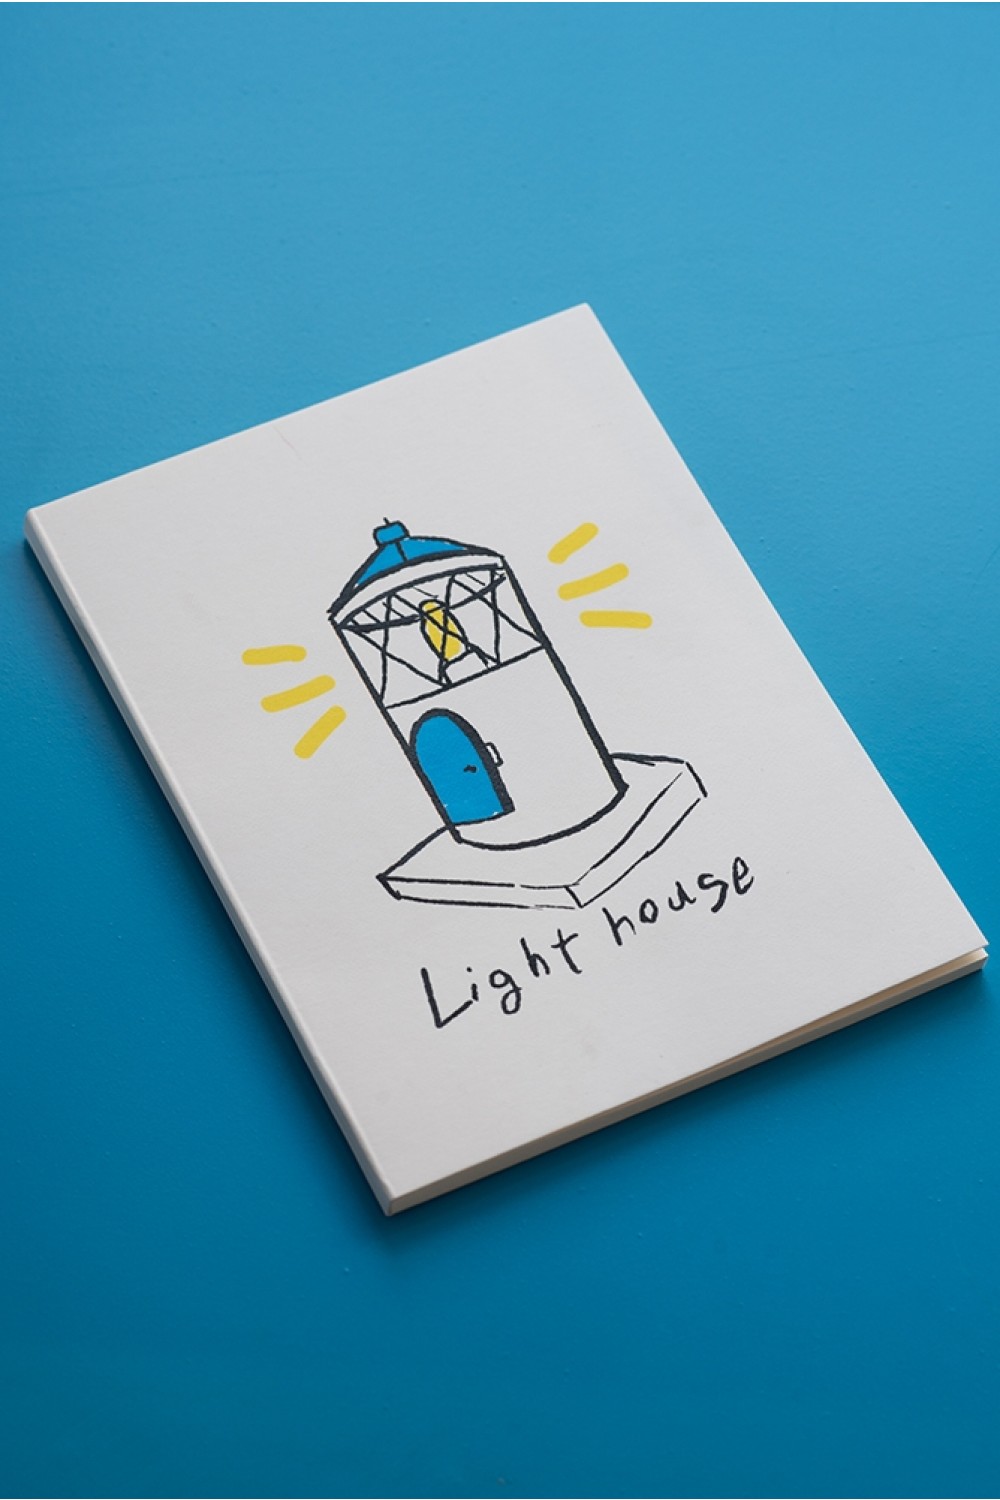 THE "LIGHTHOUSE" WHITE MINI NOTEBOOK